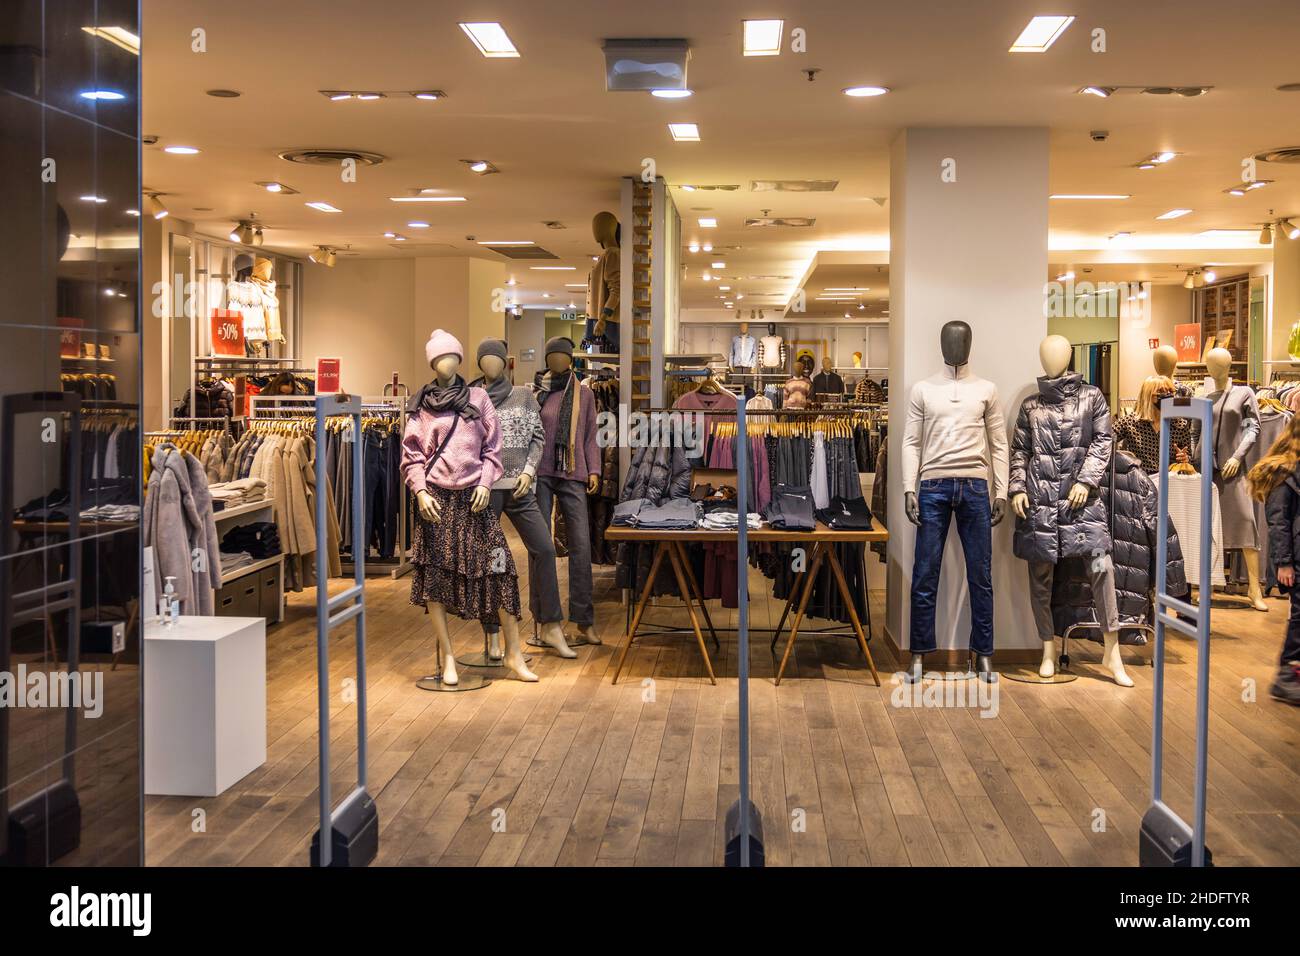 fashionable interior of clothing store in modern mall Stock Photo - Alamy